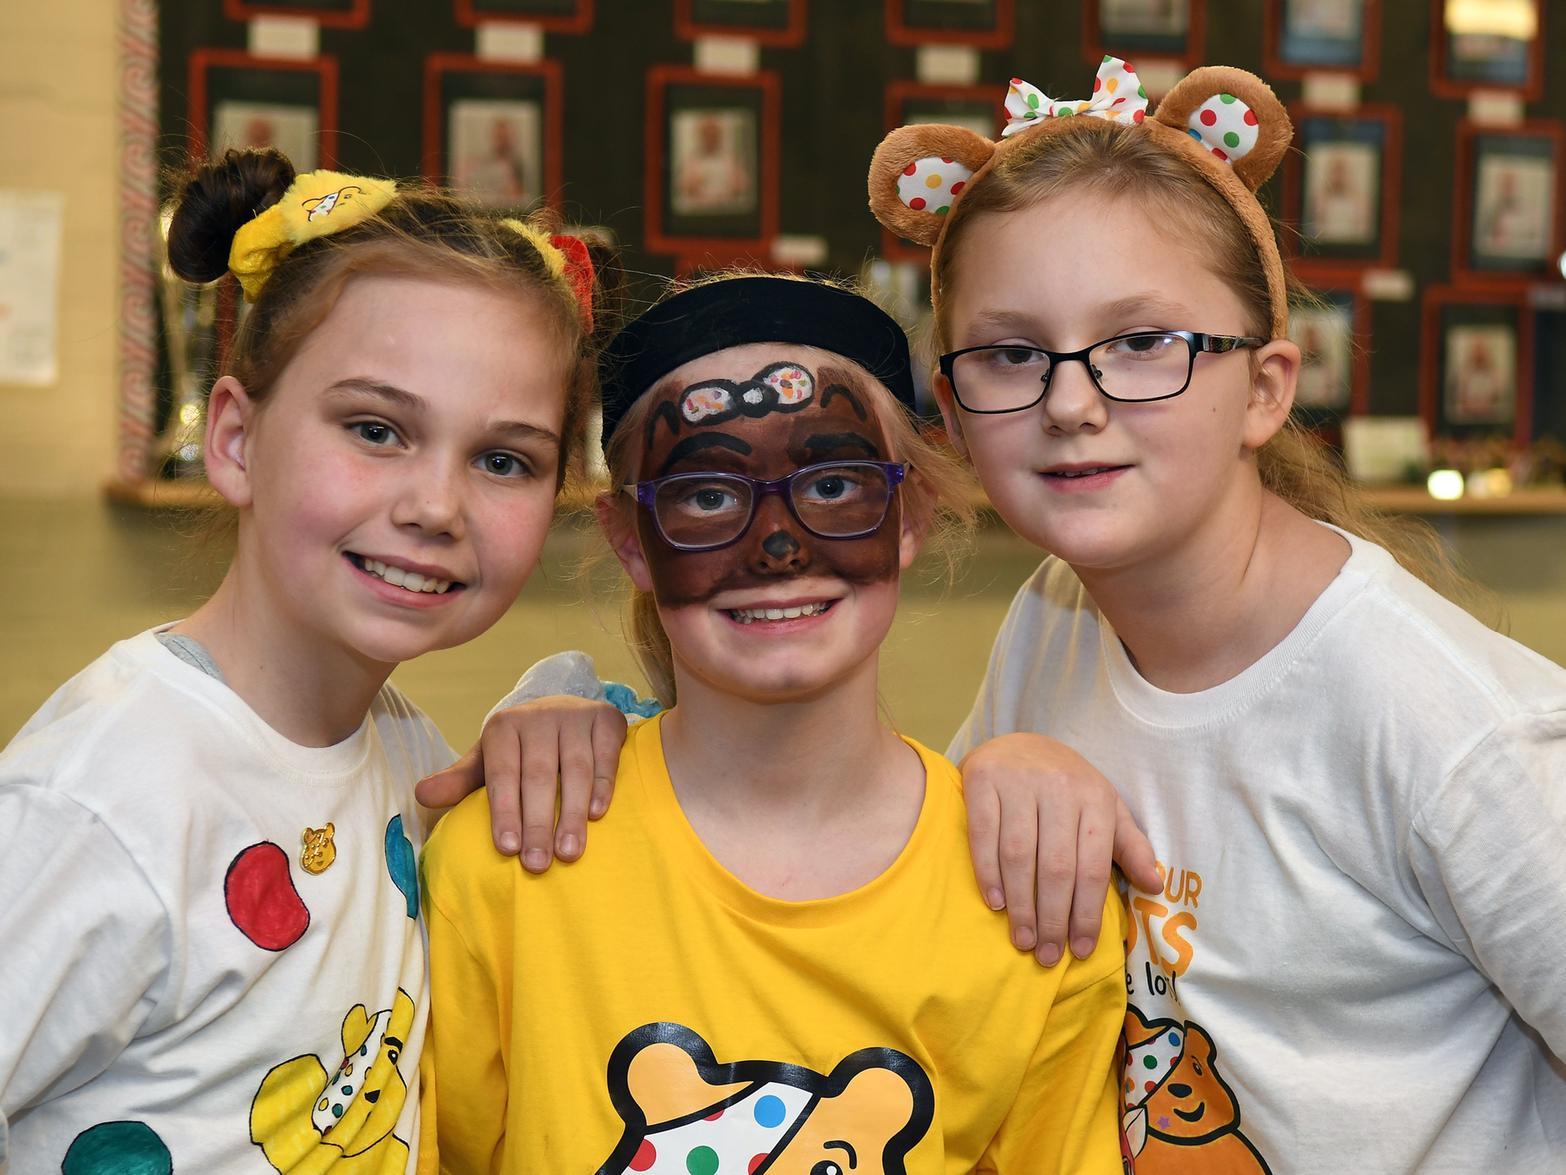 Rosie, 9, Sophie, 8, and Caitlin, 10, at Quay Academy School. Pictures by Paul Atkinson: NBFP PA1946-9d